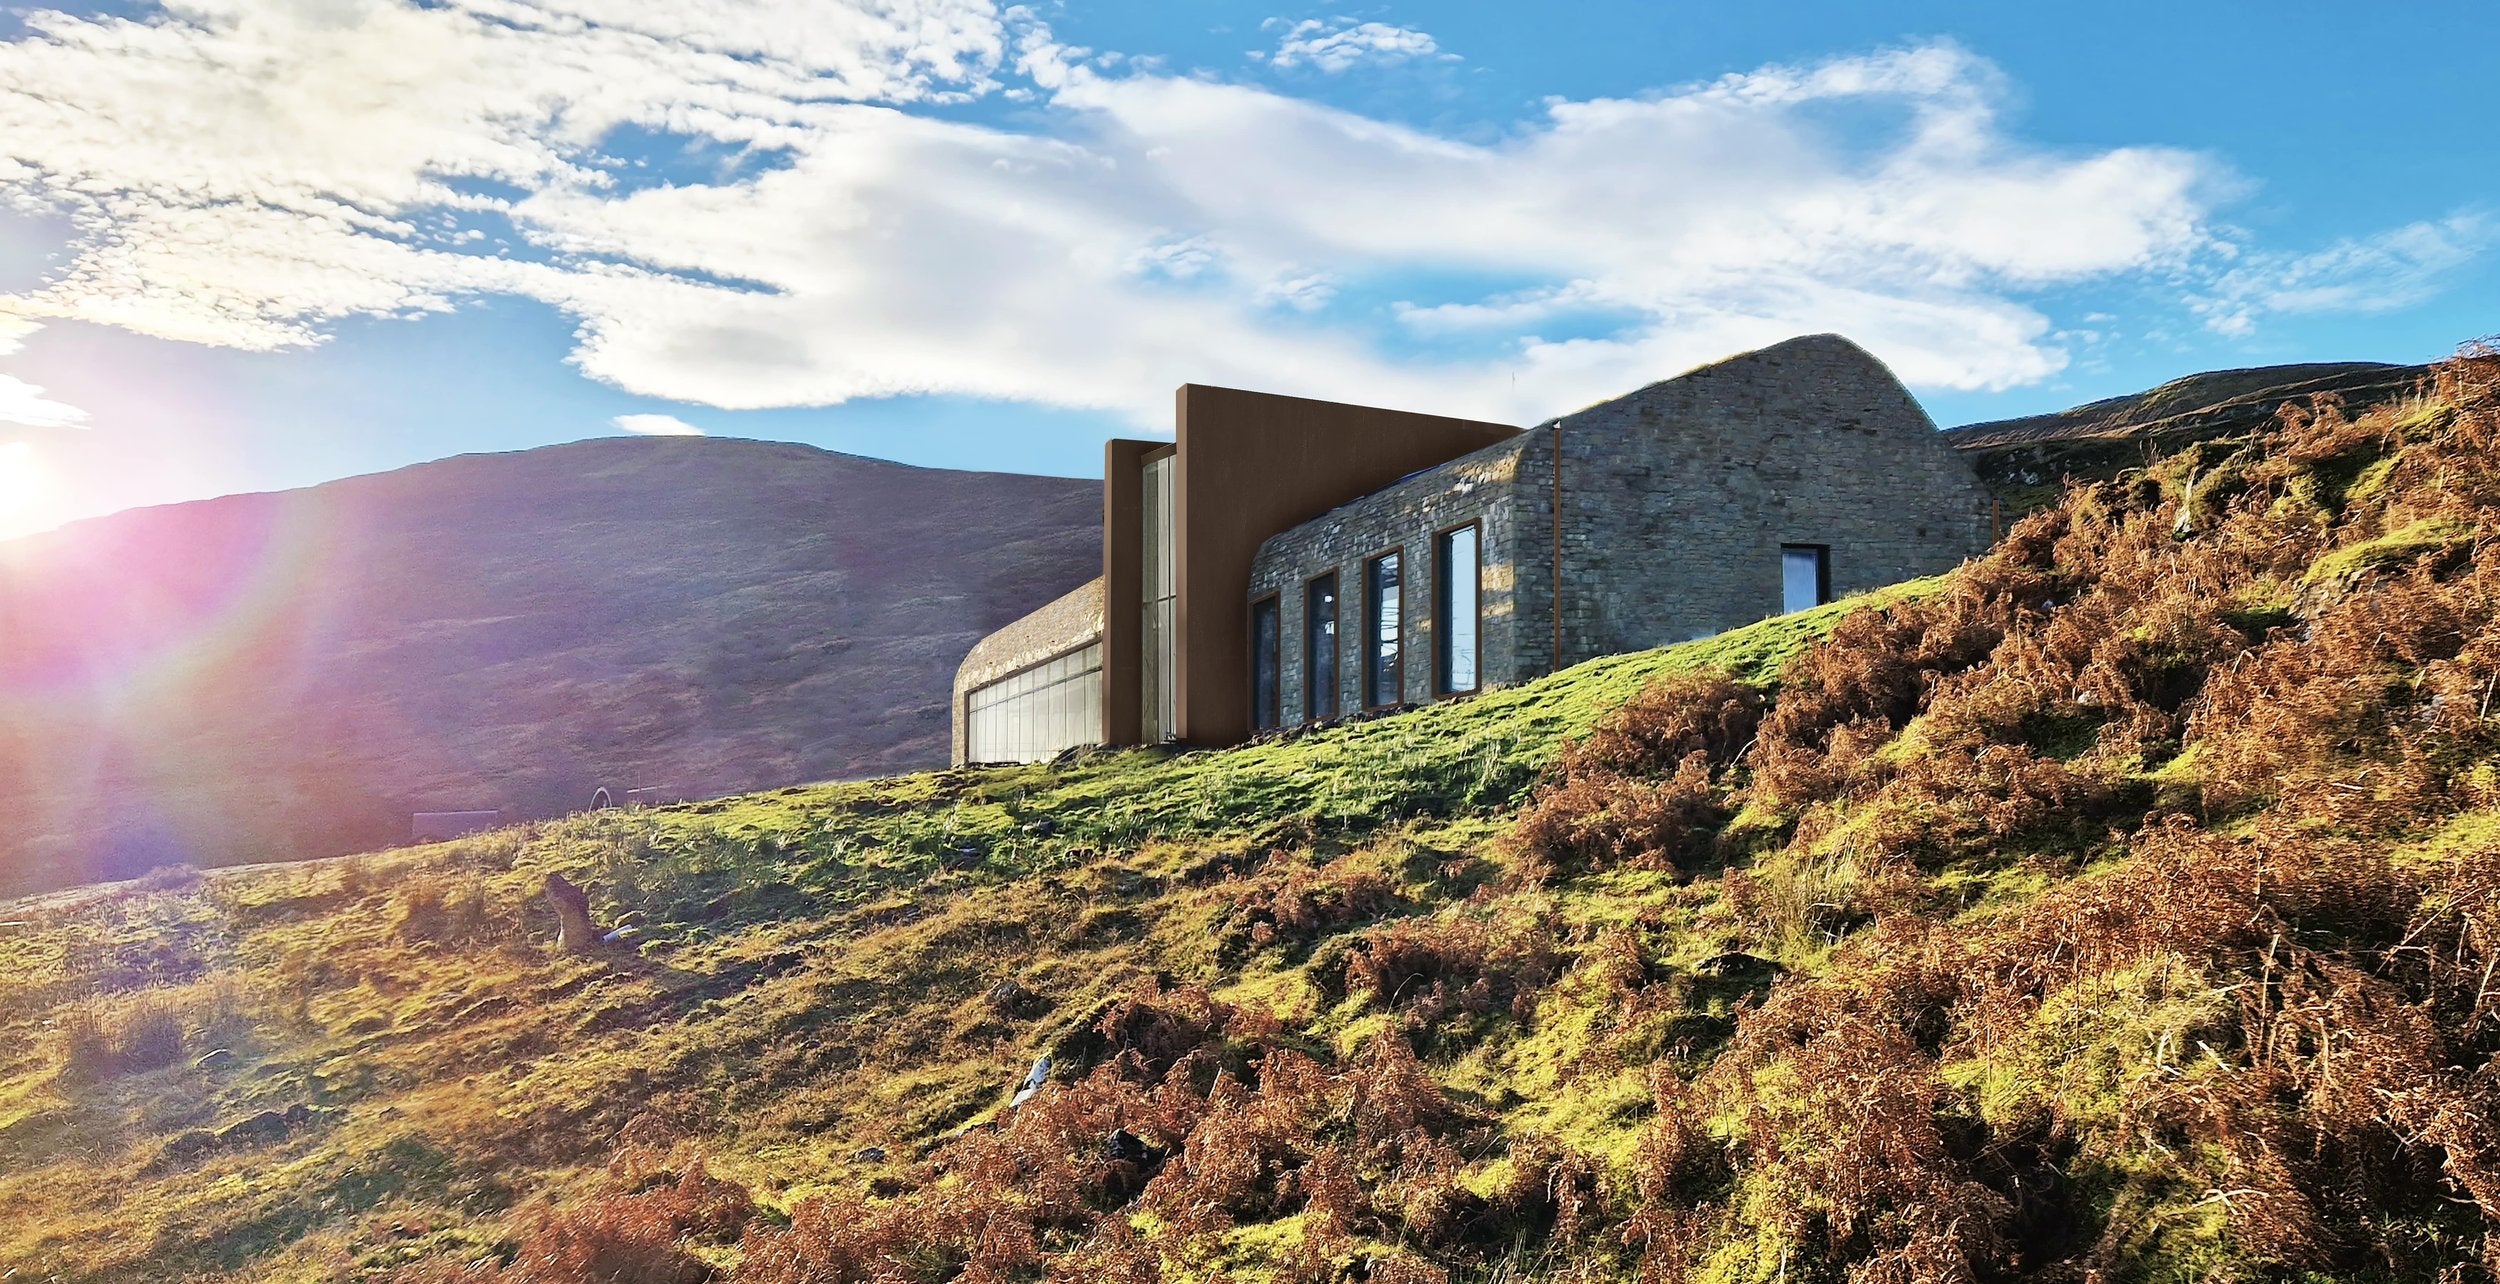 The main building is perched on a hilltop with soaring sea views across to the neighbouring Isle of Raasay